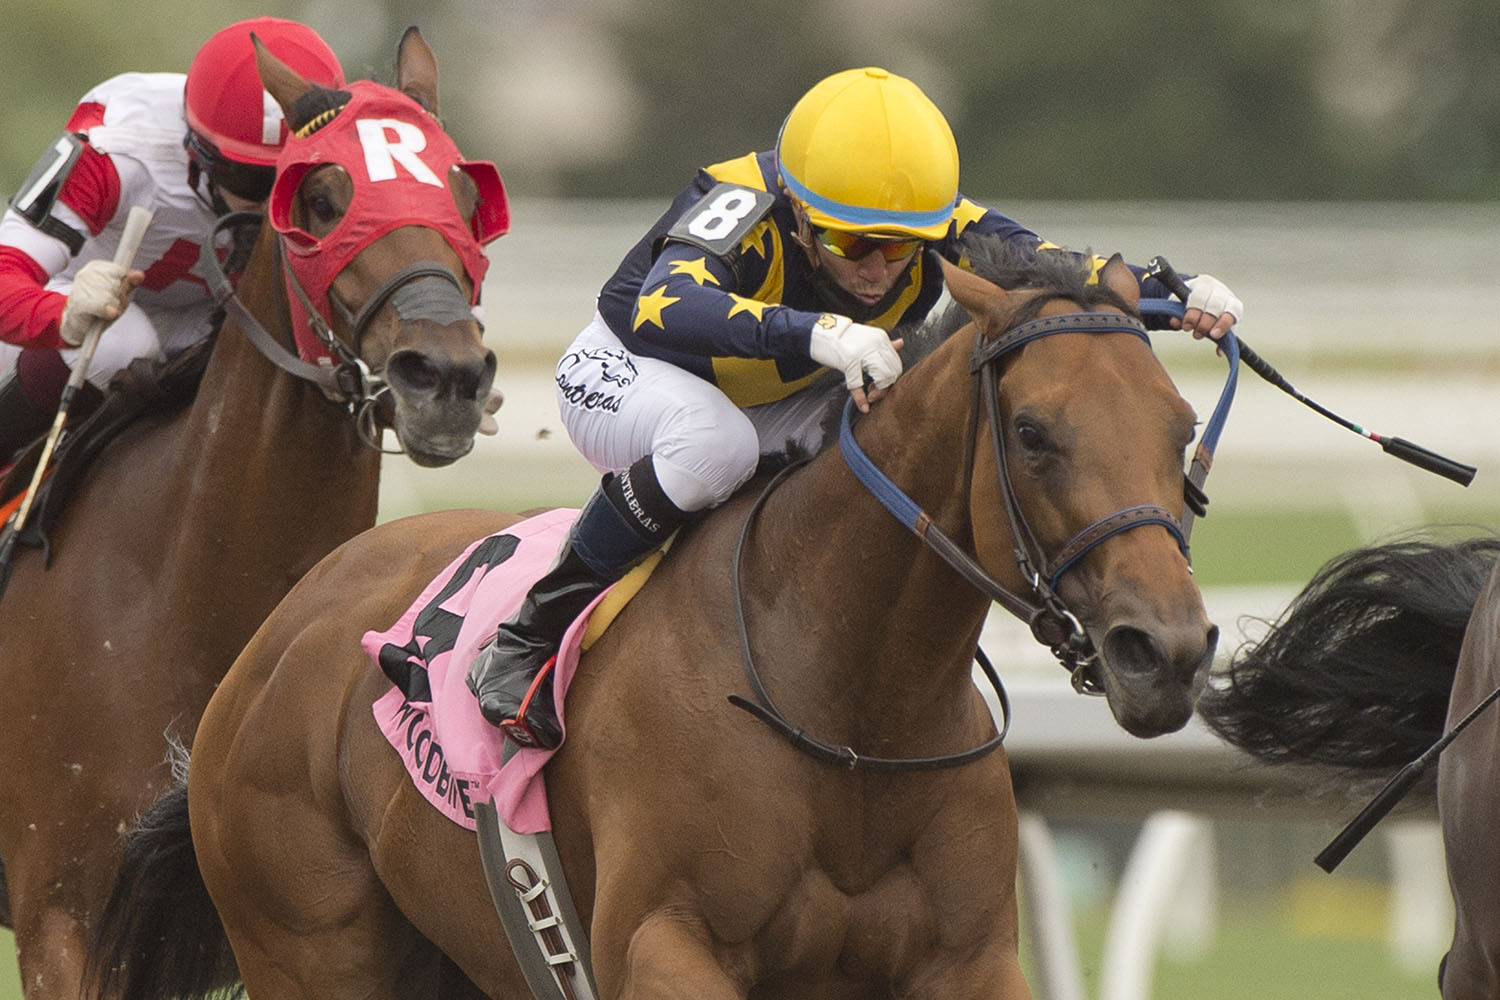 Boardroom and jockey Luis Contreras winning the $150,000 Whimsical Stakes (Grade 3) on Saturday, June 19 at Woodbine Racetrack. (Michael Burns Photo)